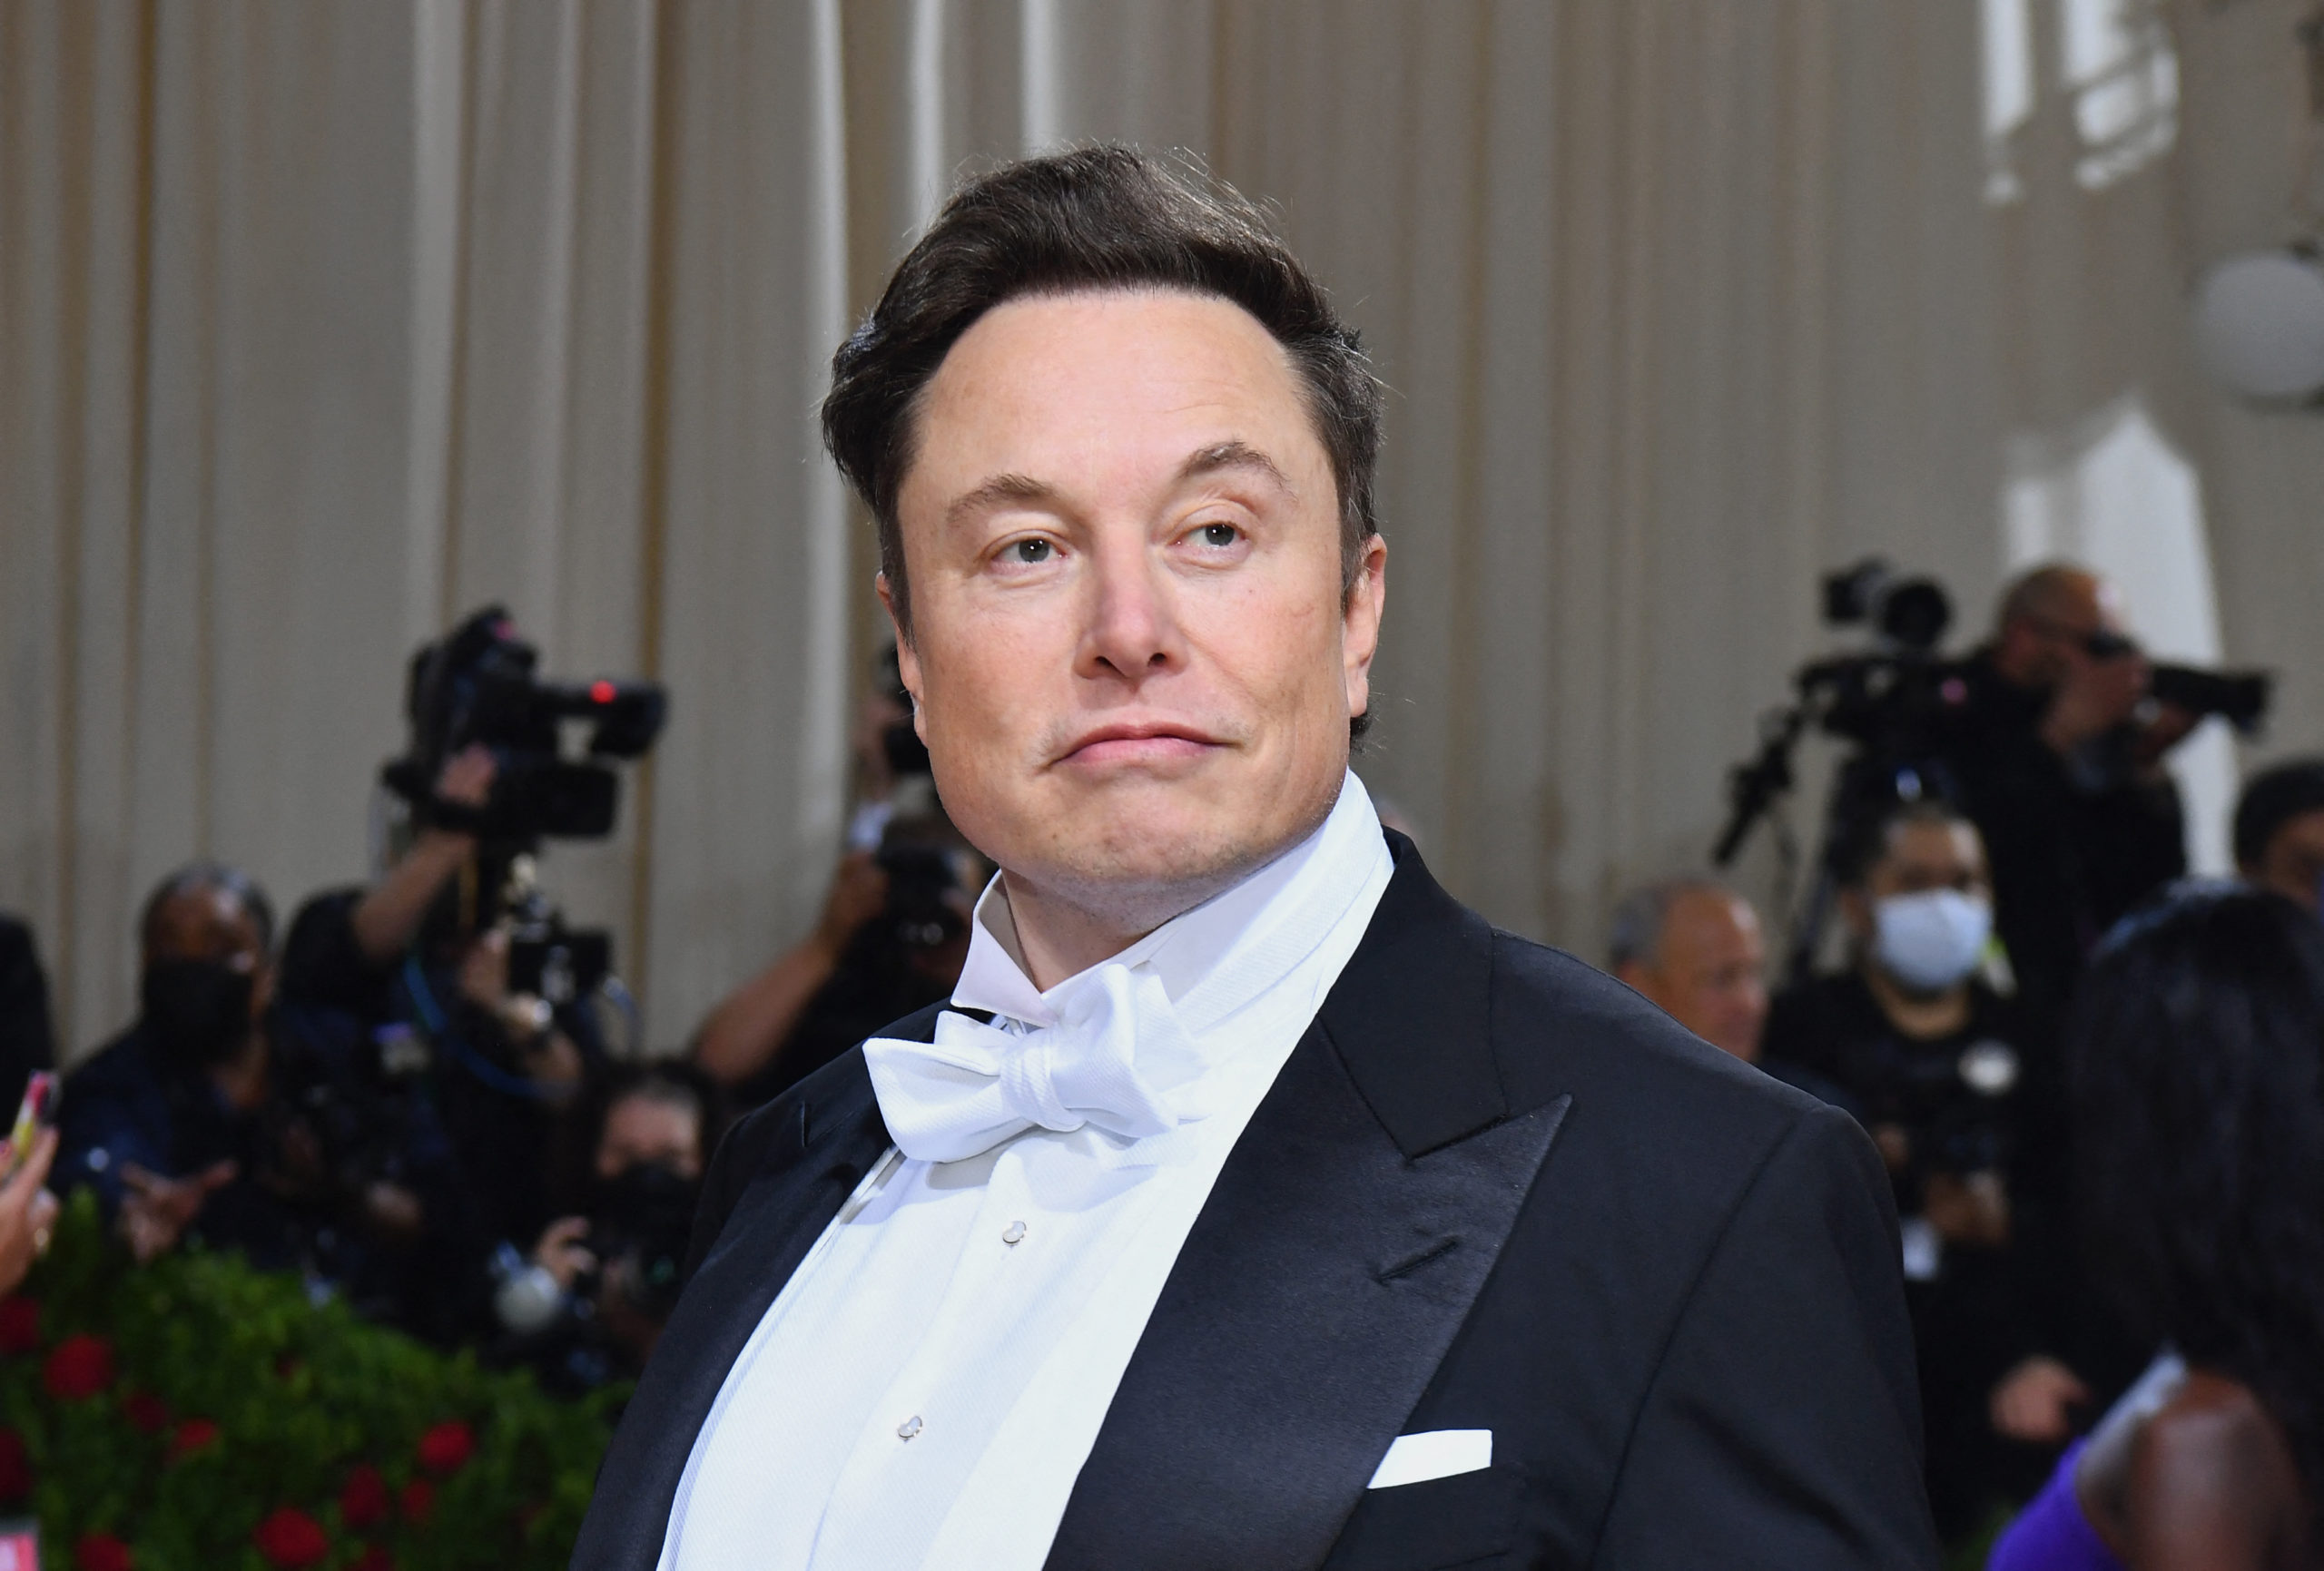 SpaceX will join Tesla in accepting dogecoin 'soon,' Musk says